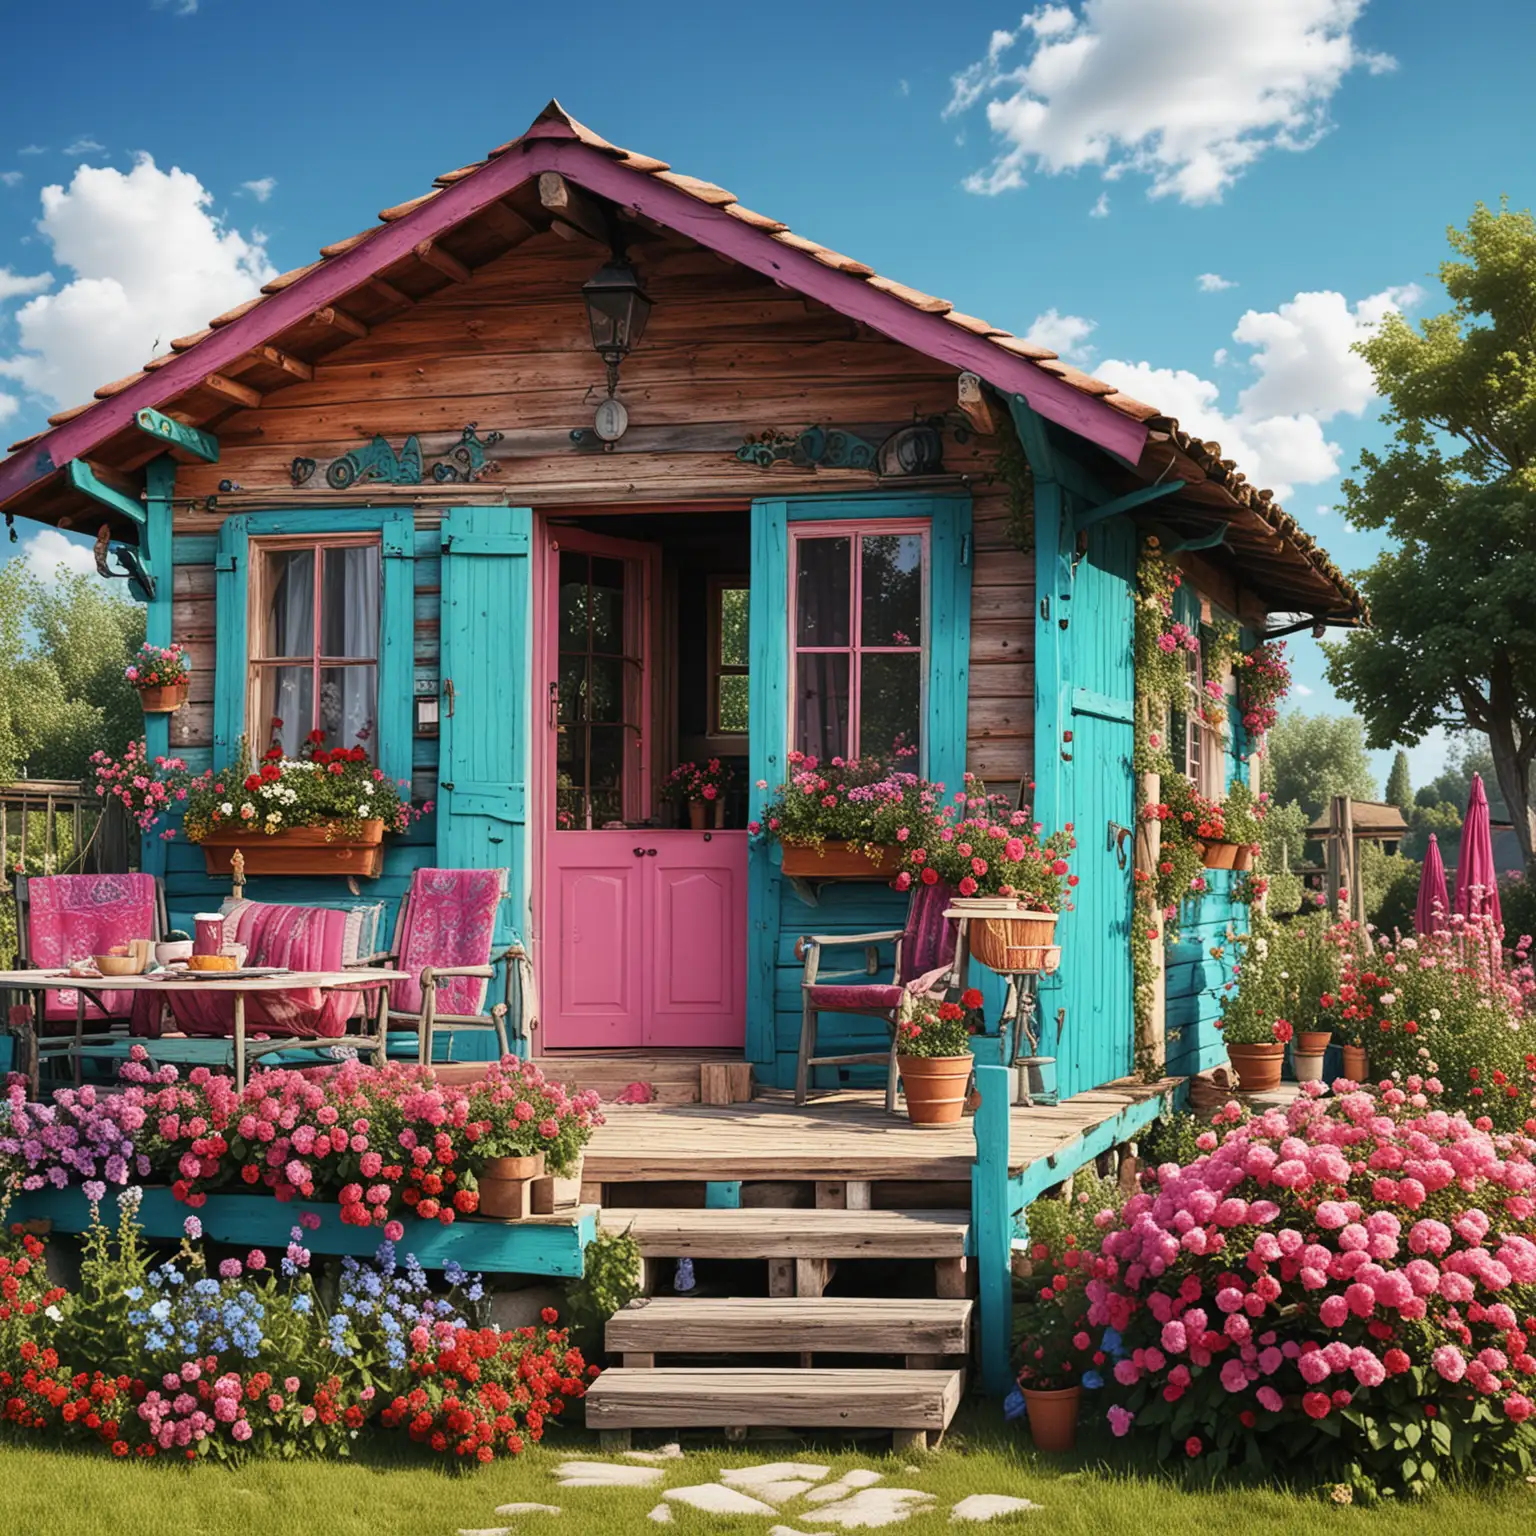 Vibrant Gypsy Style Summer Cabin Surrounded by Variant Flowers